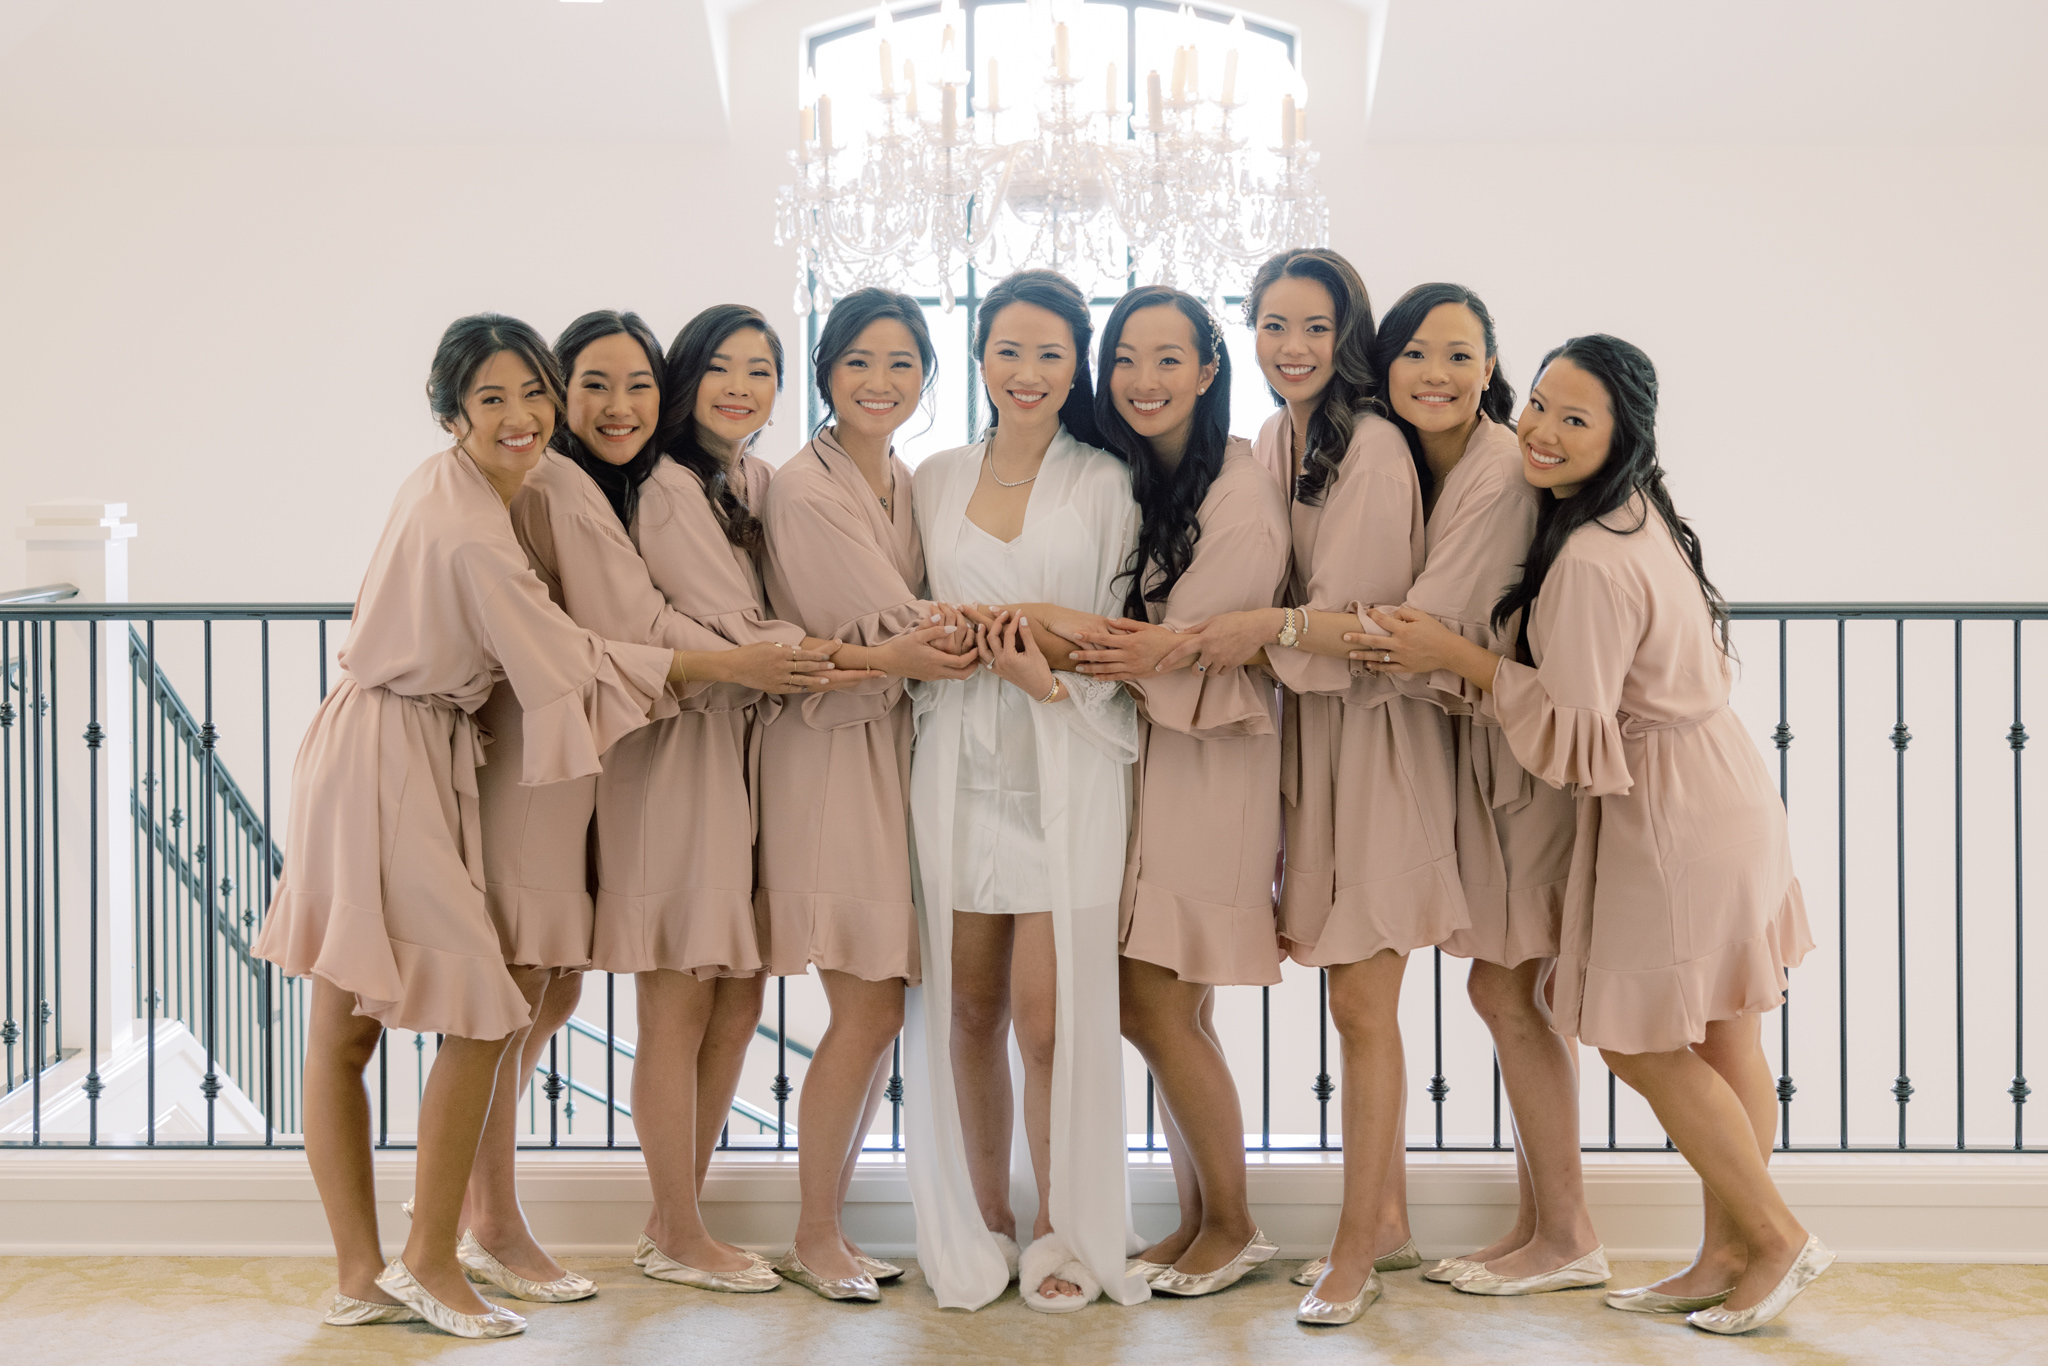 The bride and bridesmaids are preparing for the wedding. Image by Jenny Fu Studio